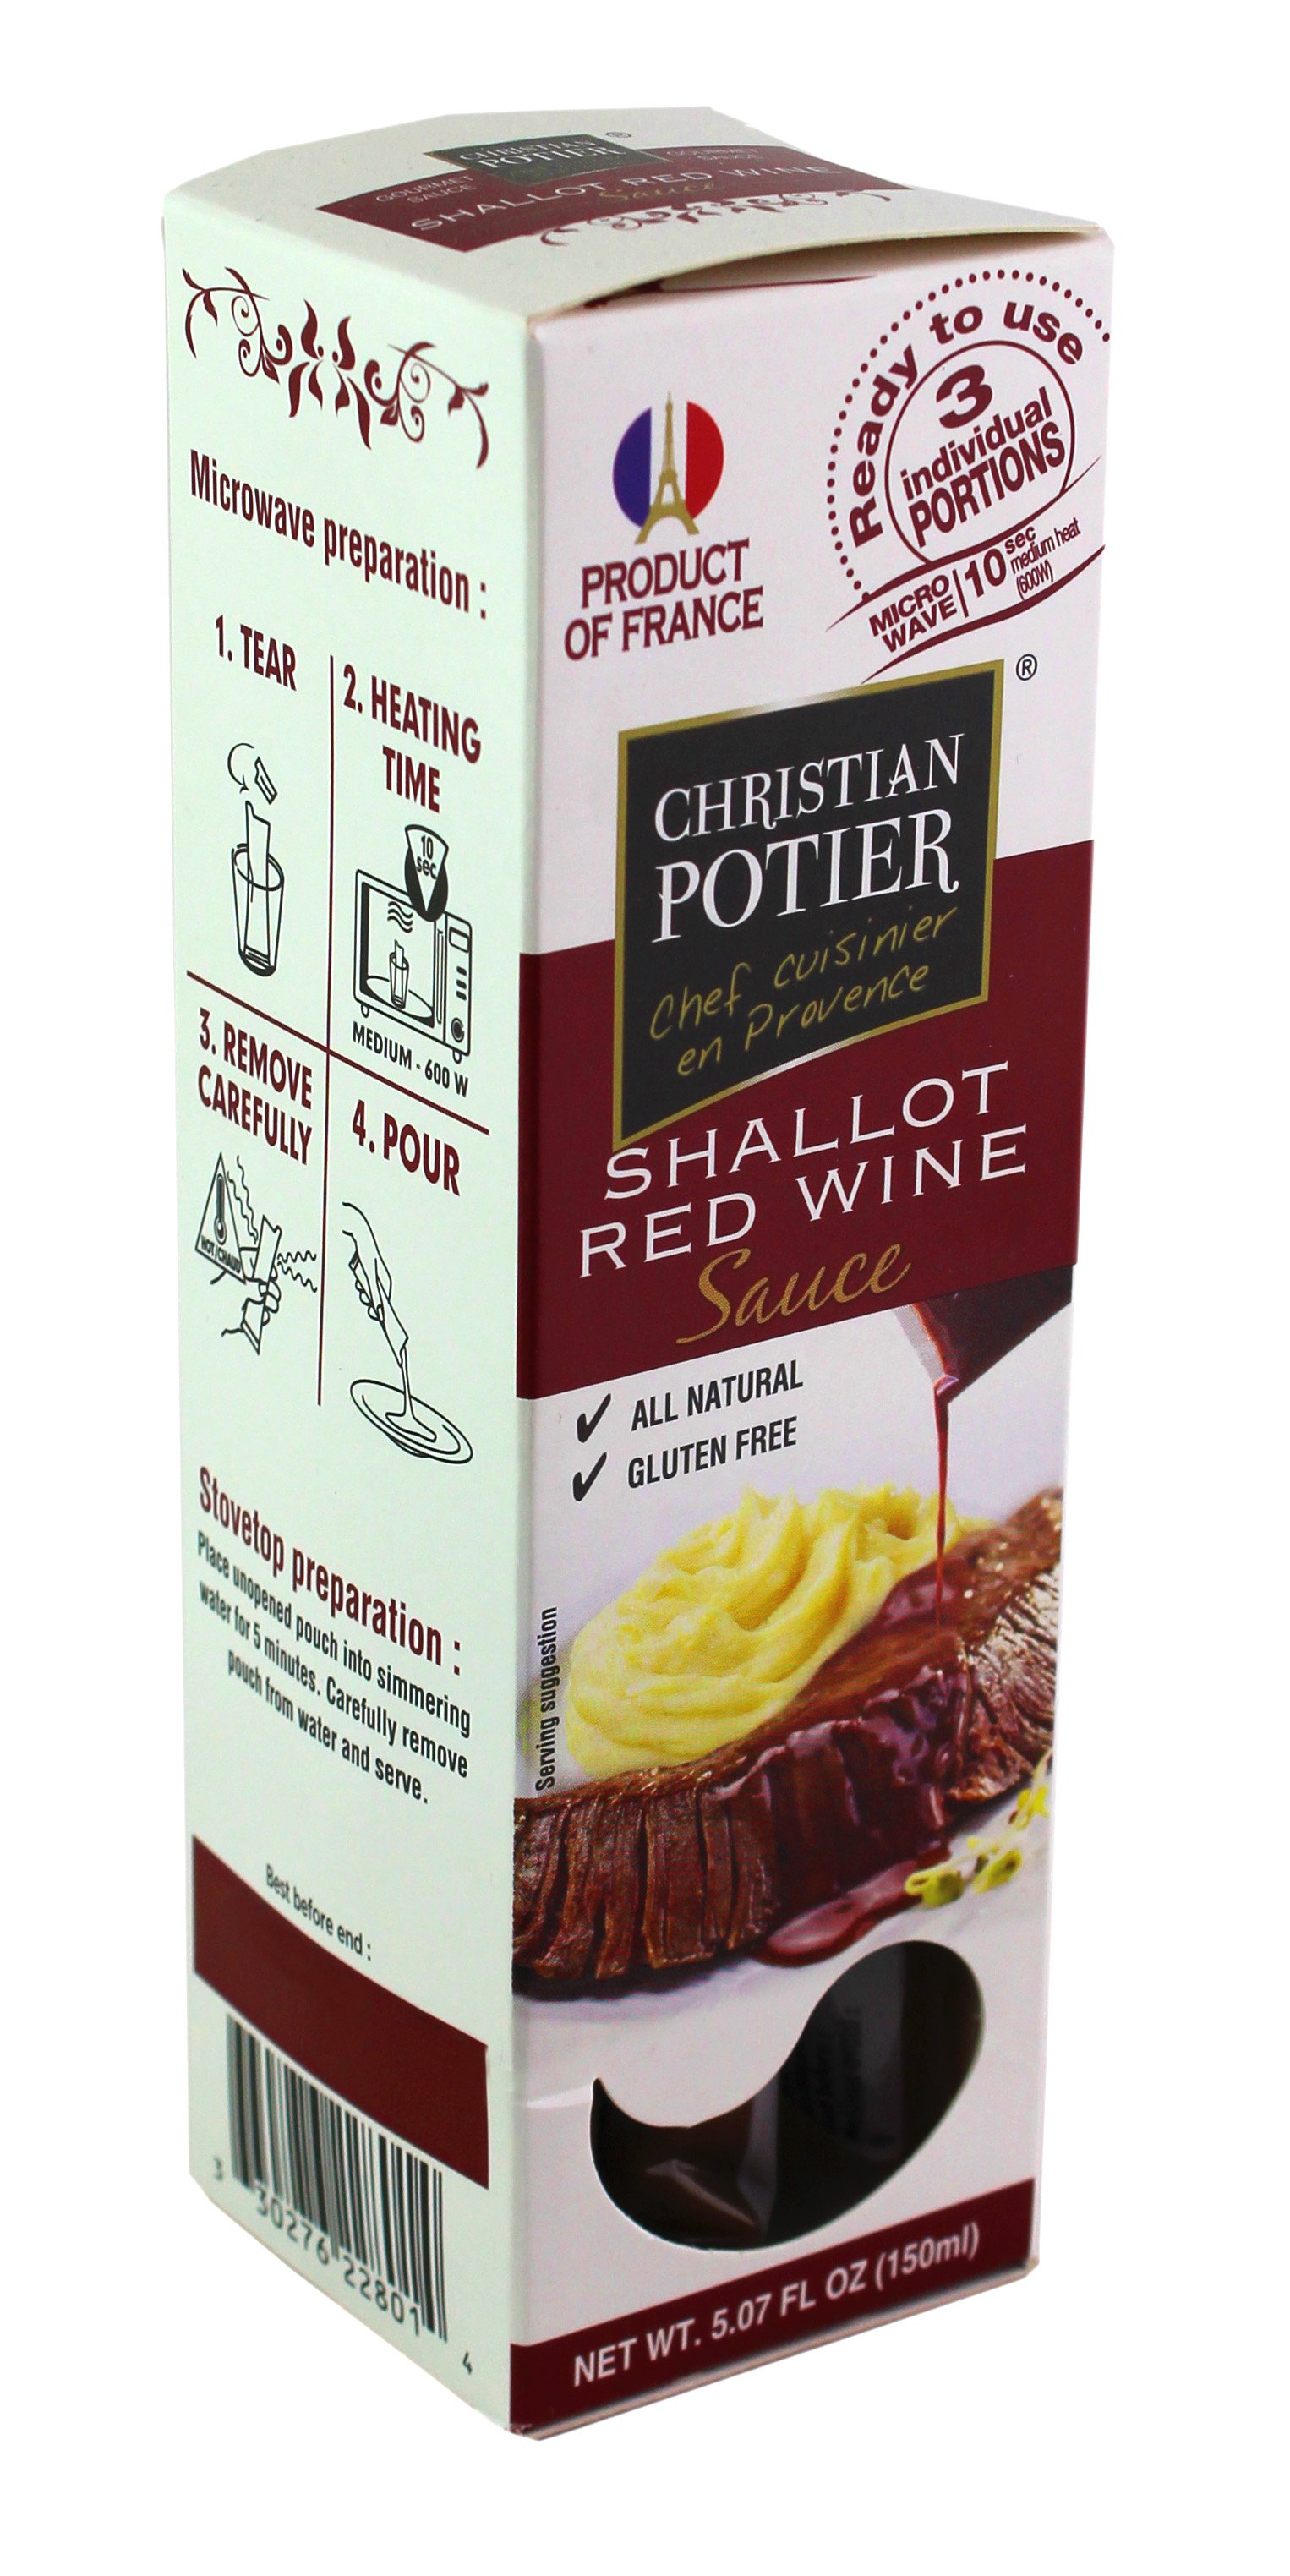 Maison Potier Red Wine and Shallot Sauce, The Authentic Sauce N